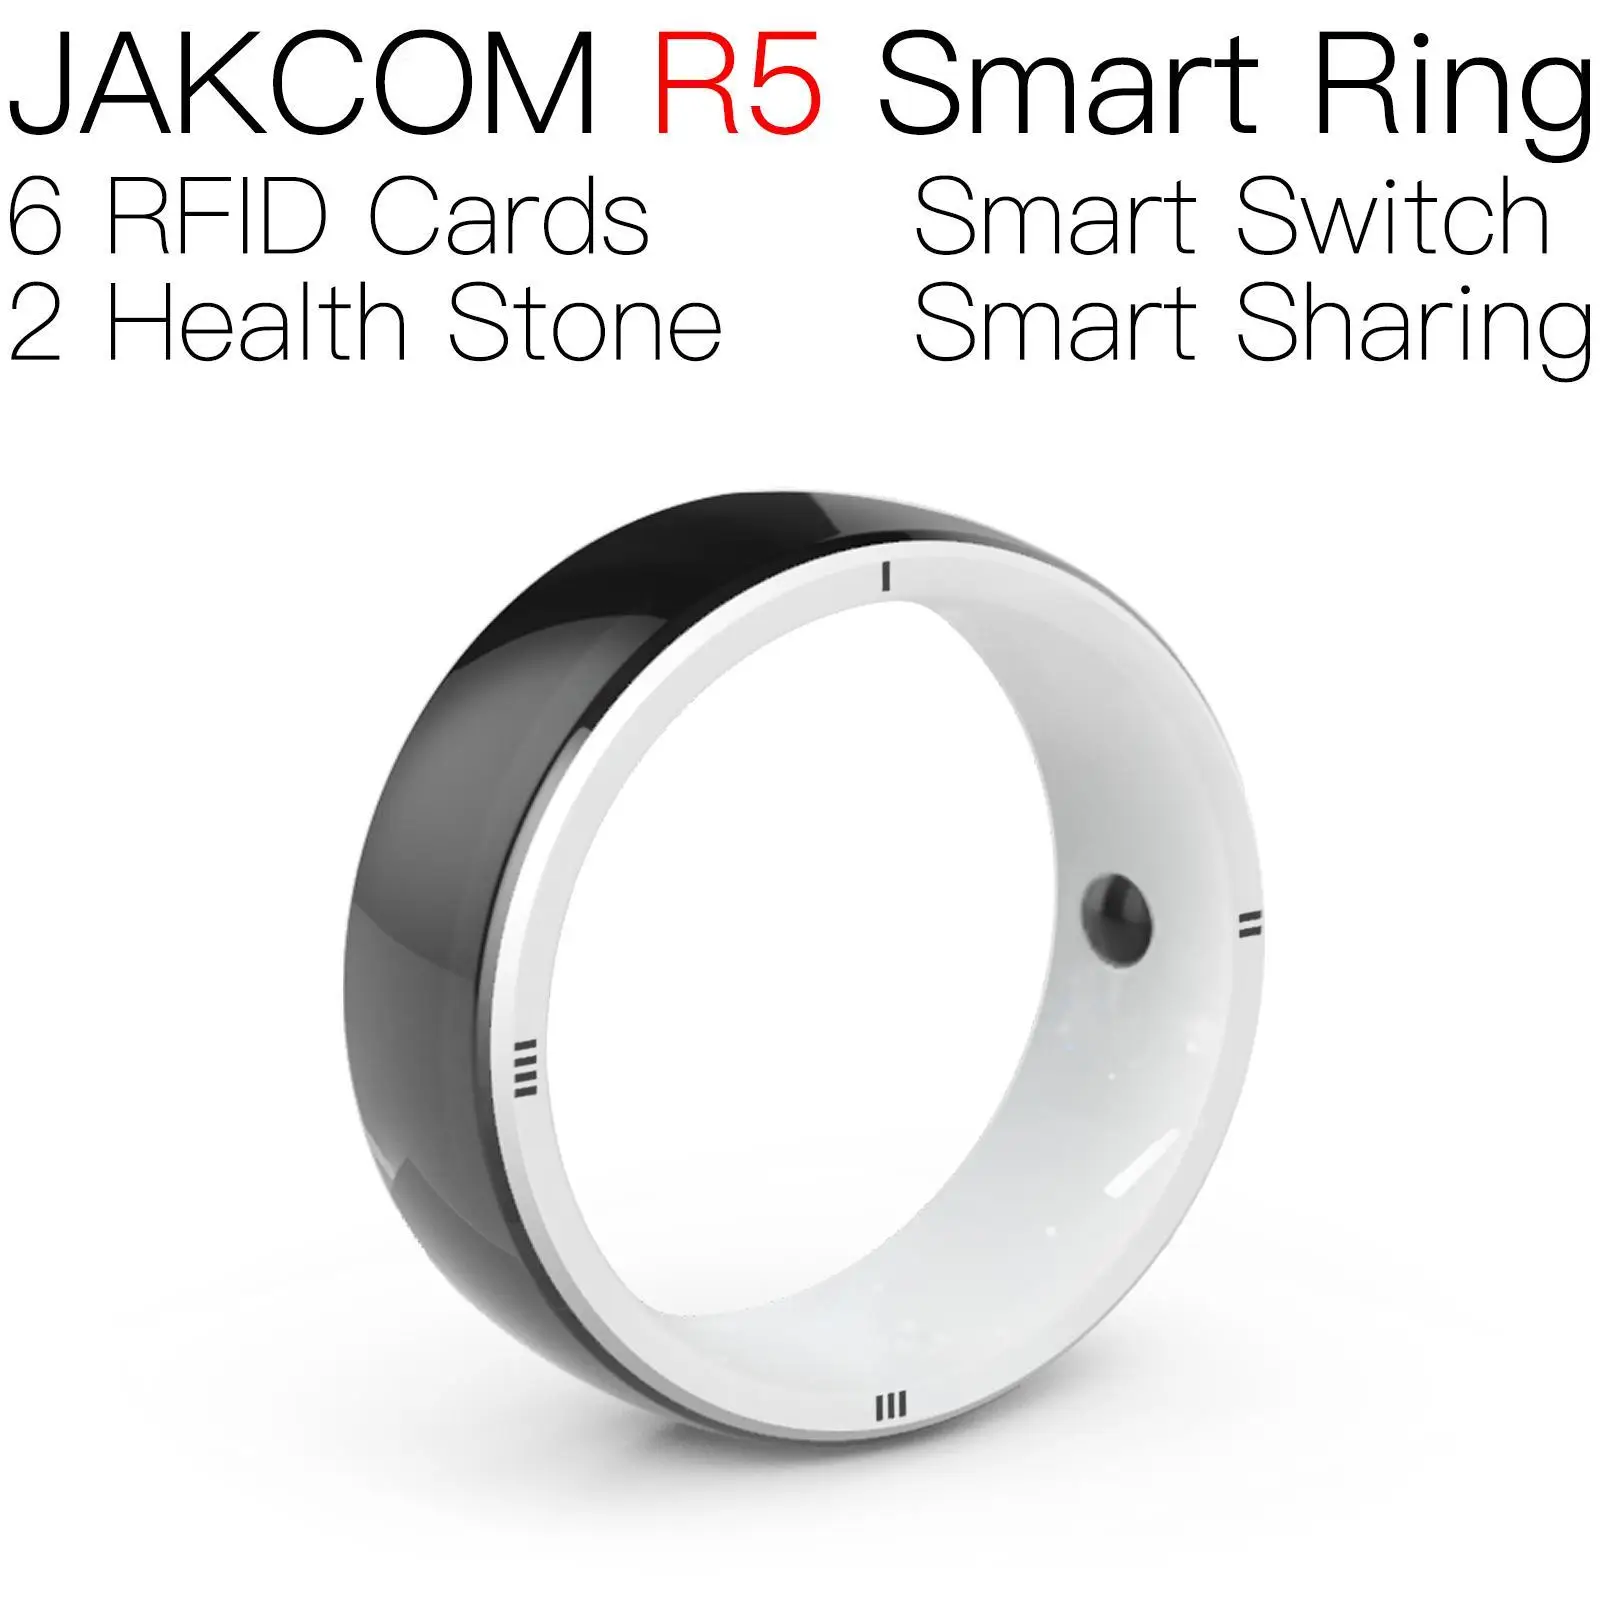 

JAKCOM R5 Smart Ring For men women transponder uid 5pcs nfc tag nfc216 label 216 stickers tags badges code anodized card chips